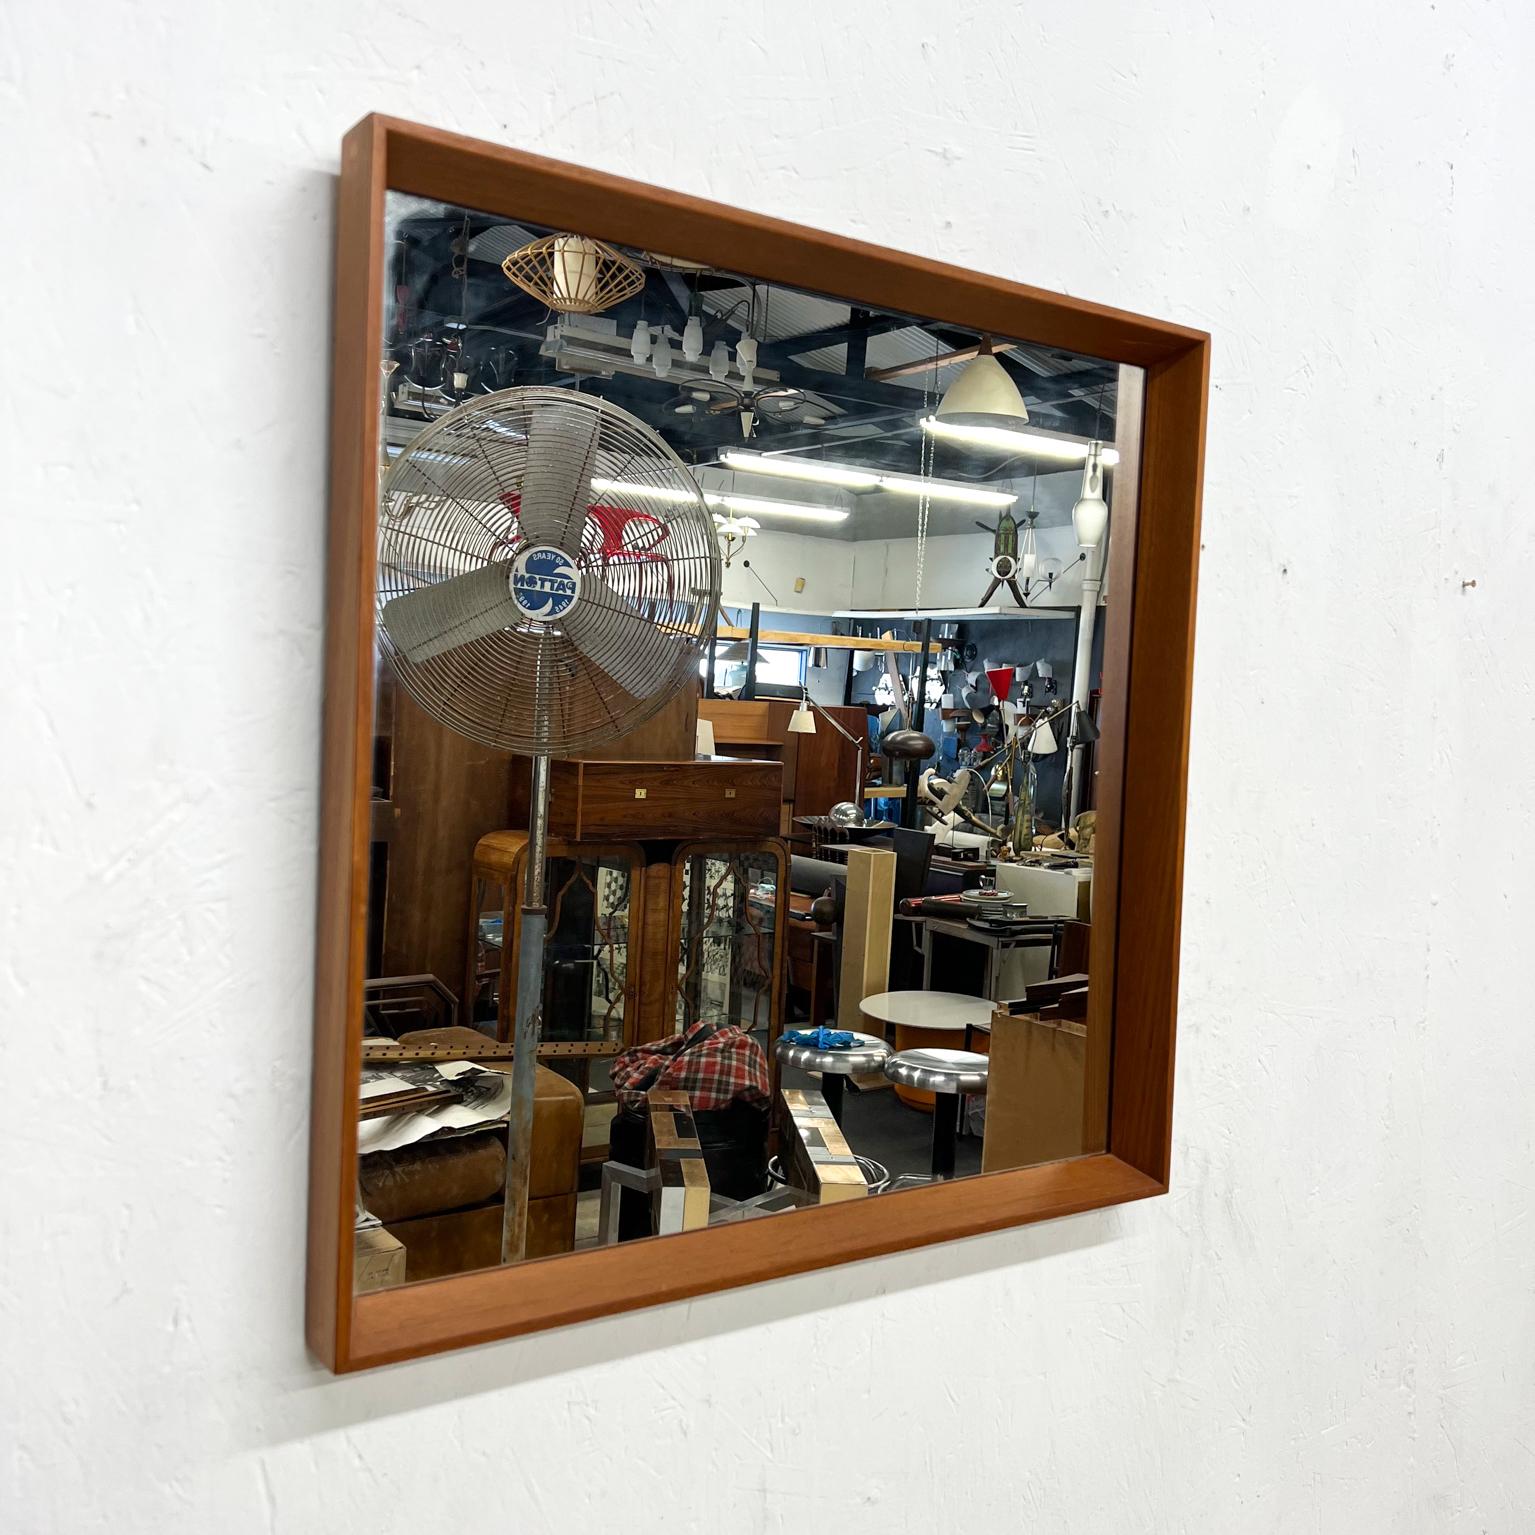 Mid 20th century modern teak wall mirror Denmark 1970s 
Unmarked in the Style Pedersen & Hansen
Medium Size Mirror in teak wood. Beautiful clean modern lines.
Beveled and tapered angles give a clean sophisticated look.
Expect vintage wear. Not new.